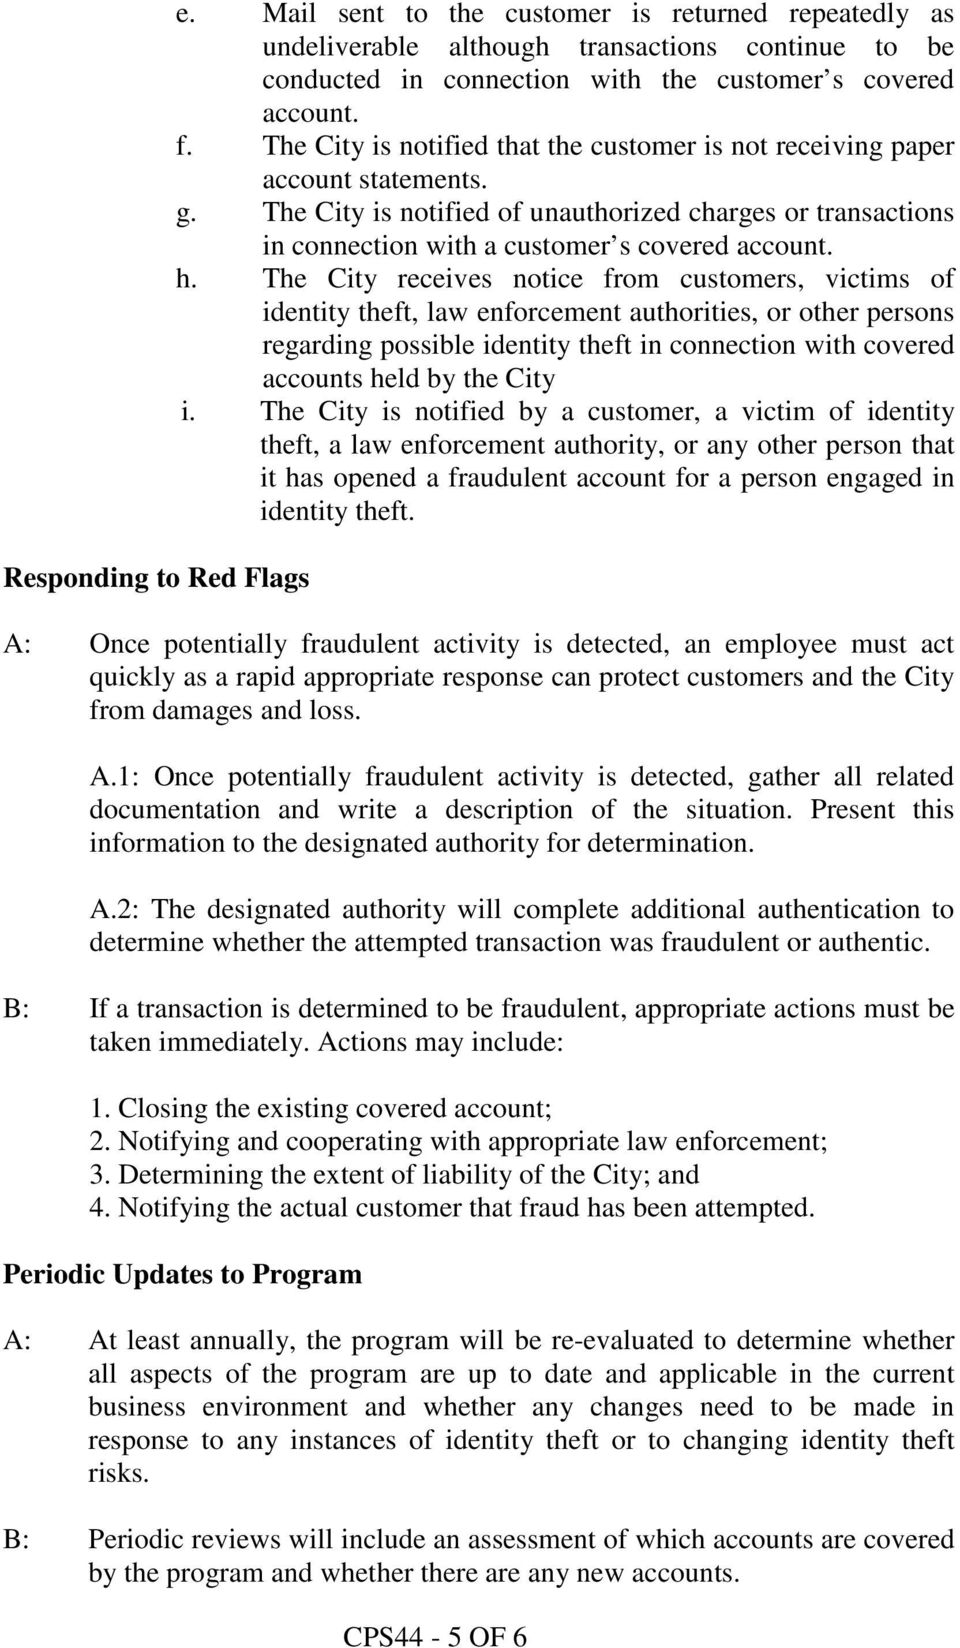 The City receives notice from customers, victims of identity theft, law enforcement authorities, or other persons regarding possible identity theft in connection with covered accounts held by the